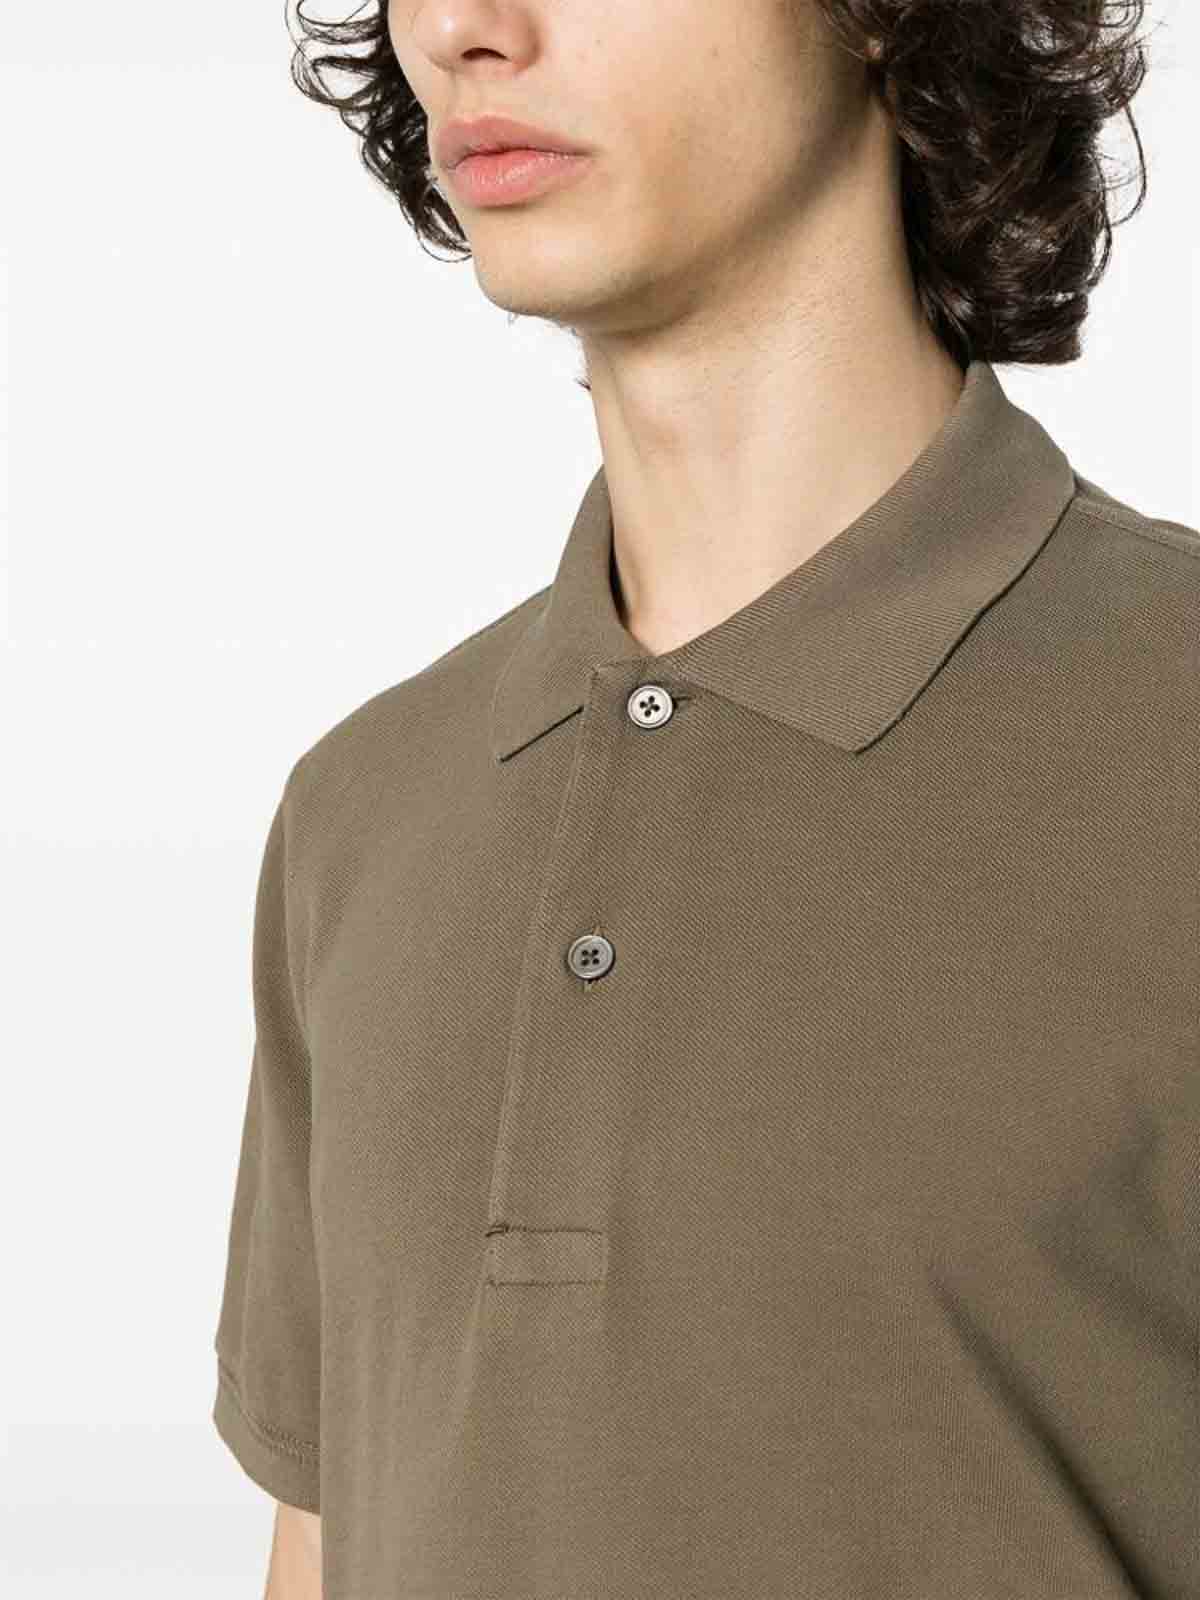 Shop Tom Ford Olive Brown Piqu Polo Shirt In Green